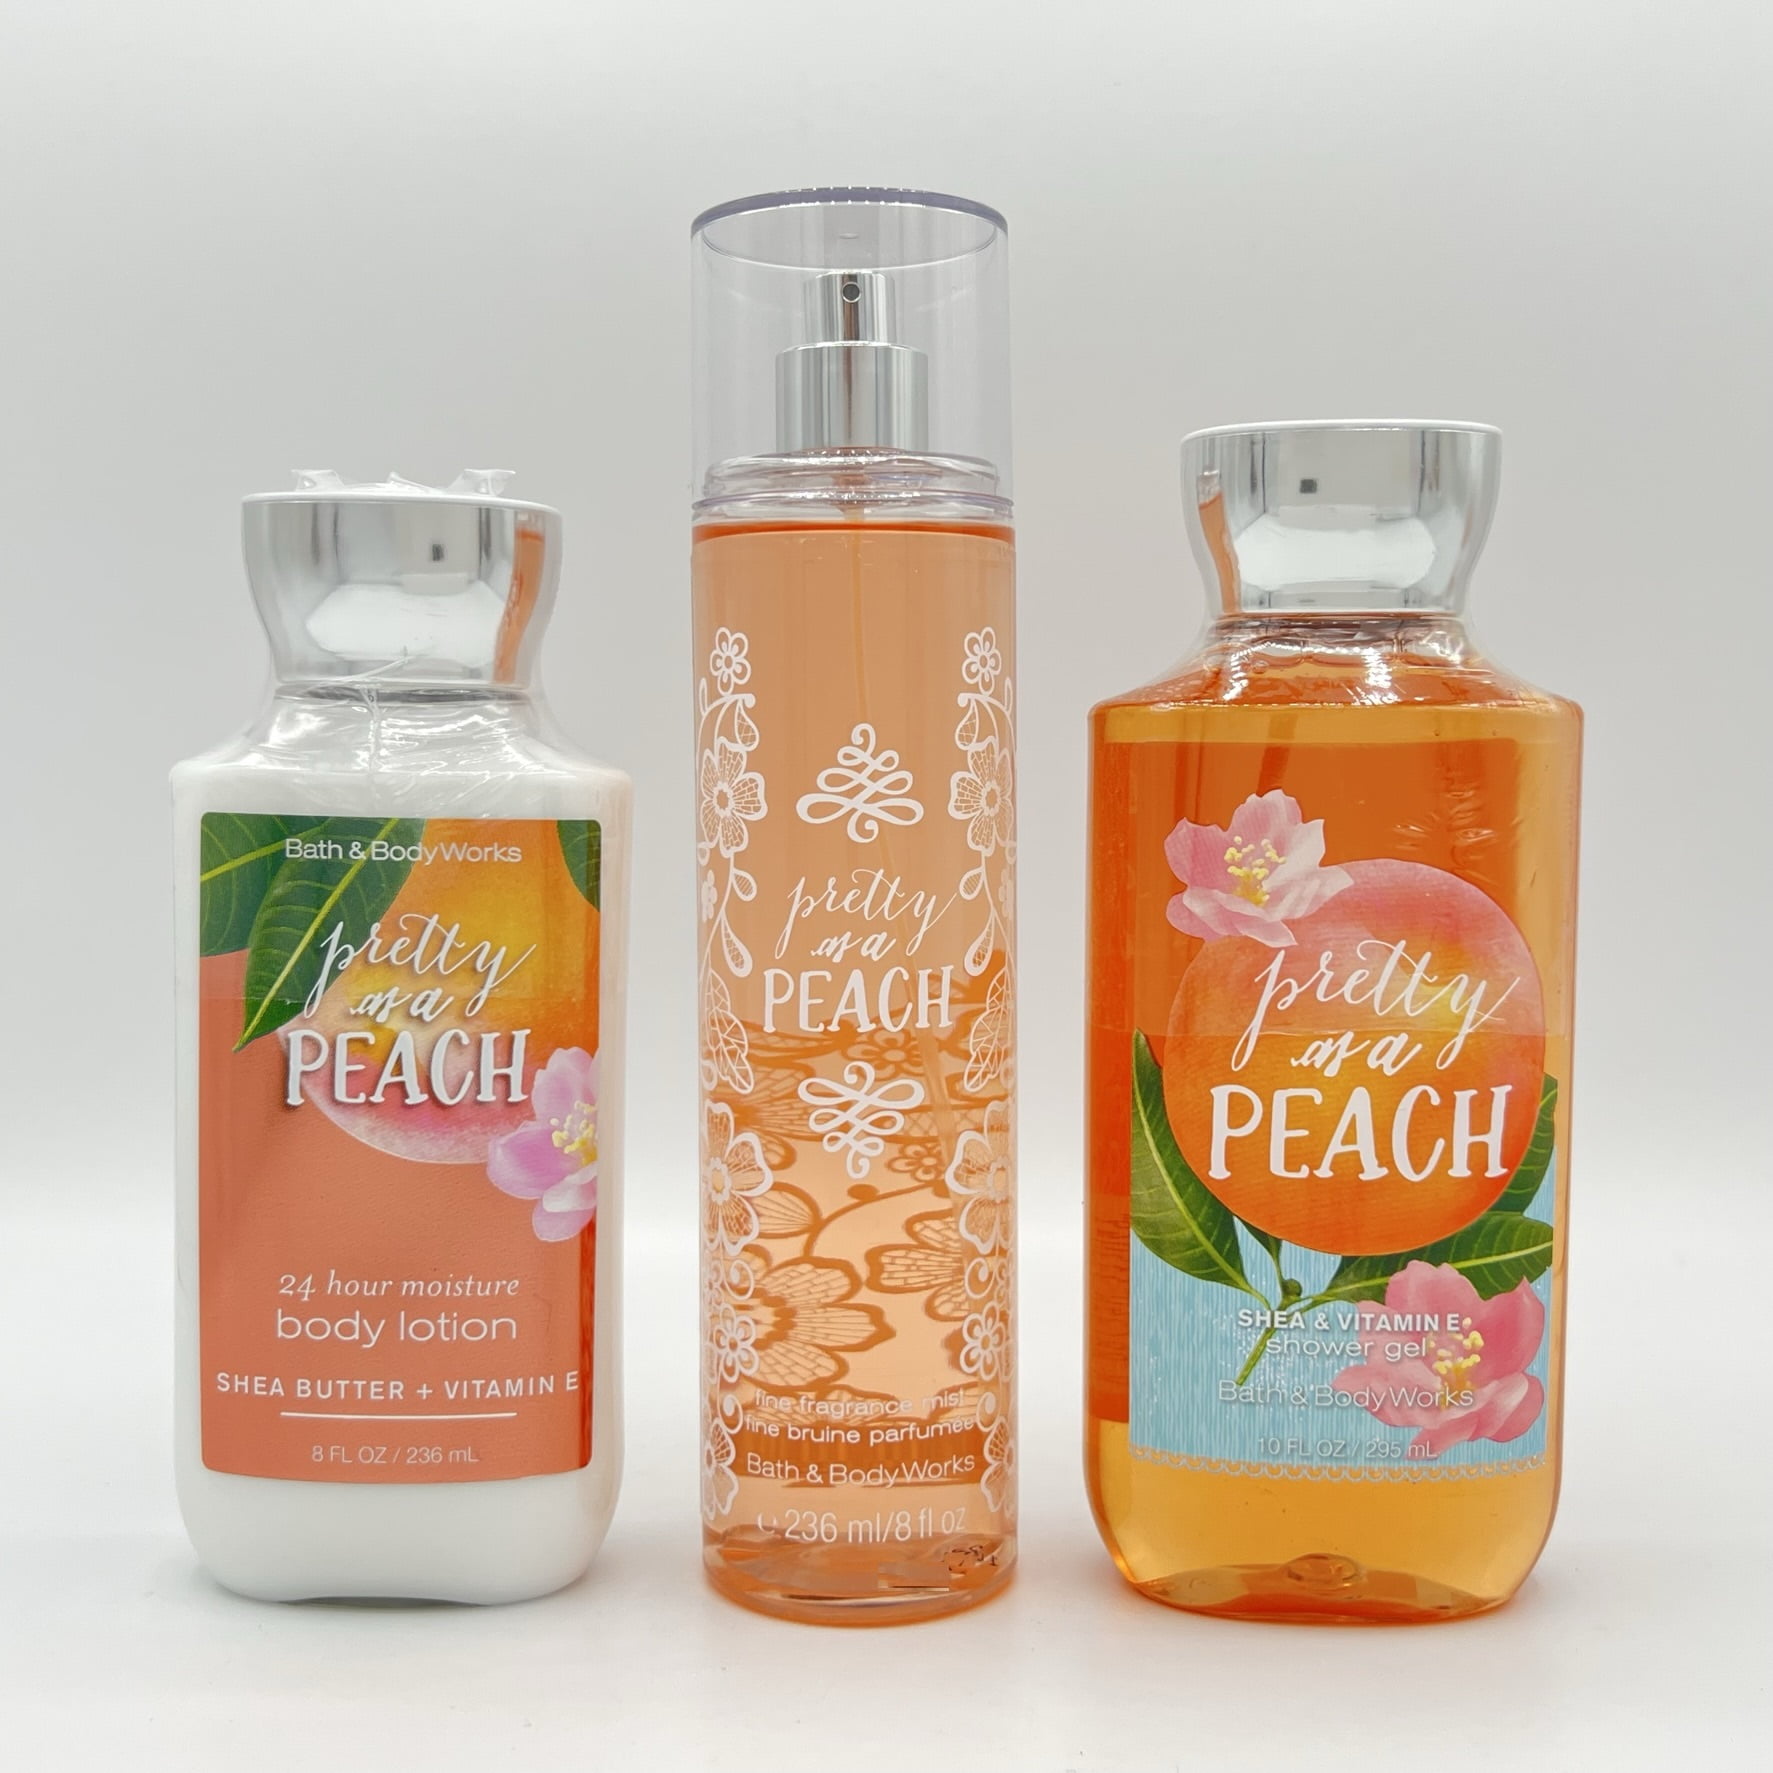 White Barn Bath and Body Works Cactus Blossom Gentle Foaming Hand Soap Pink  Pump Bottle 8.75 Ounce Full Size 